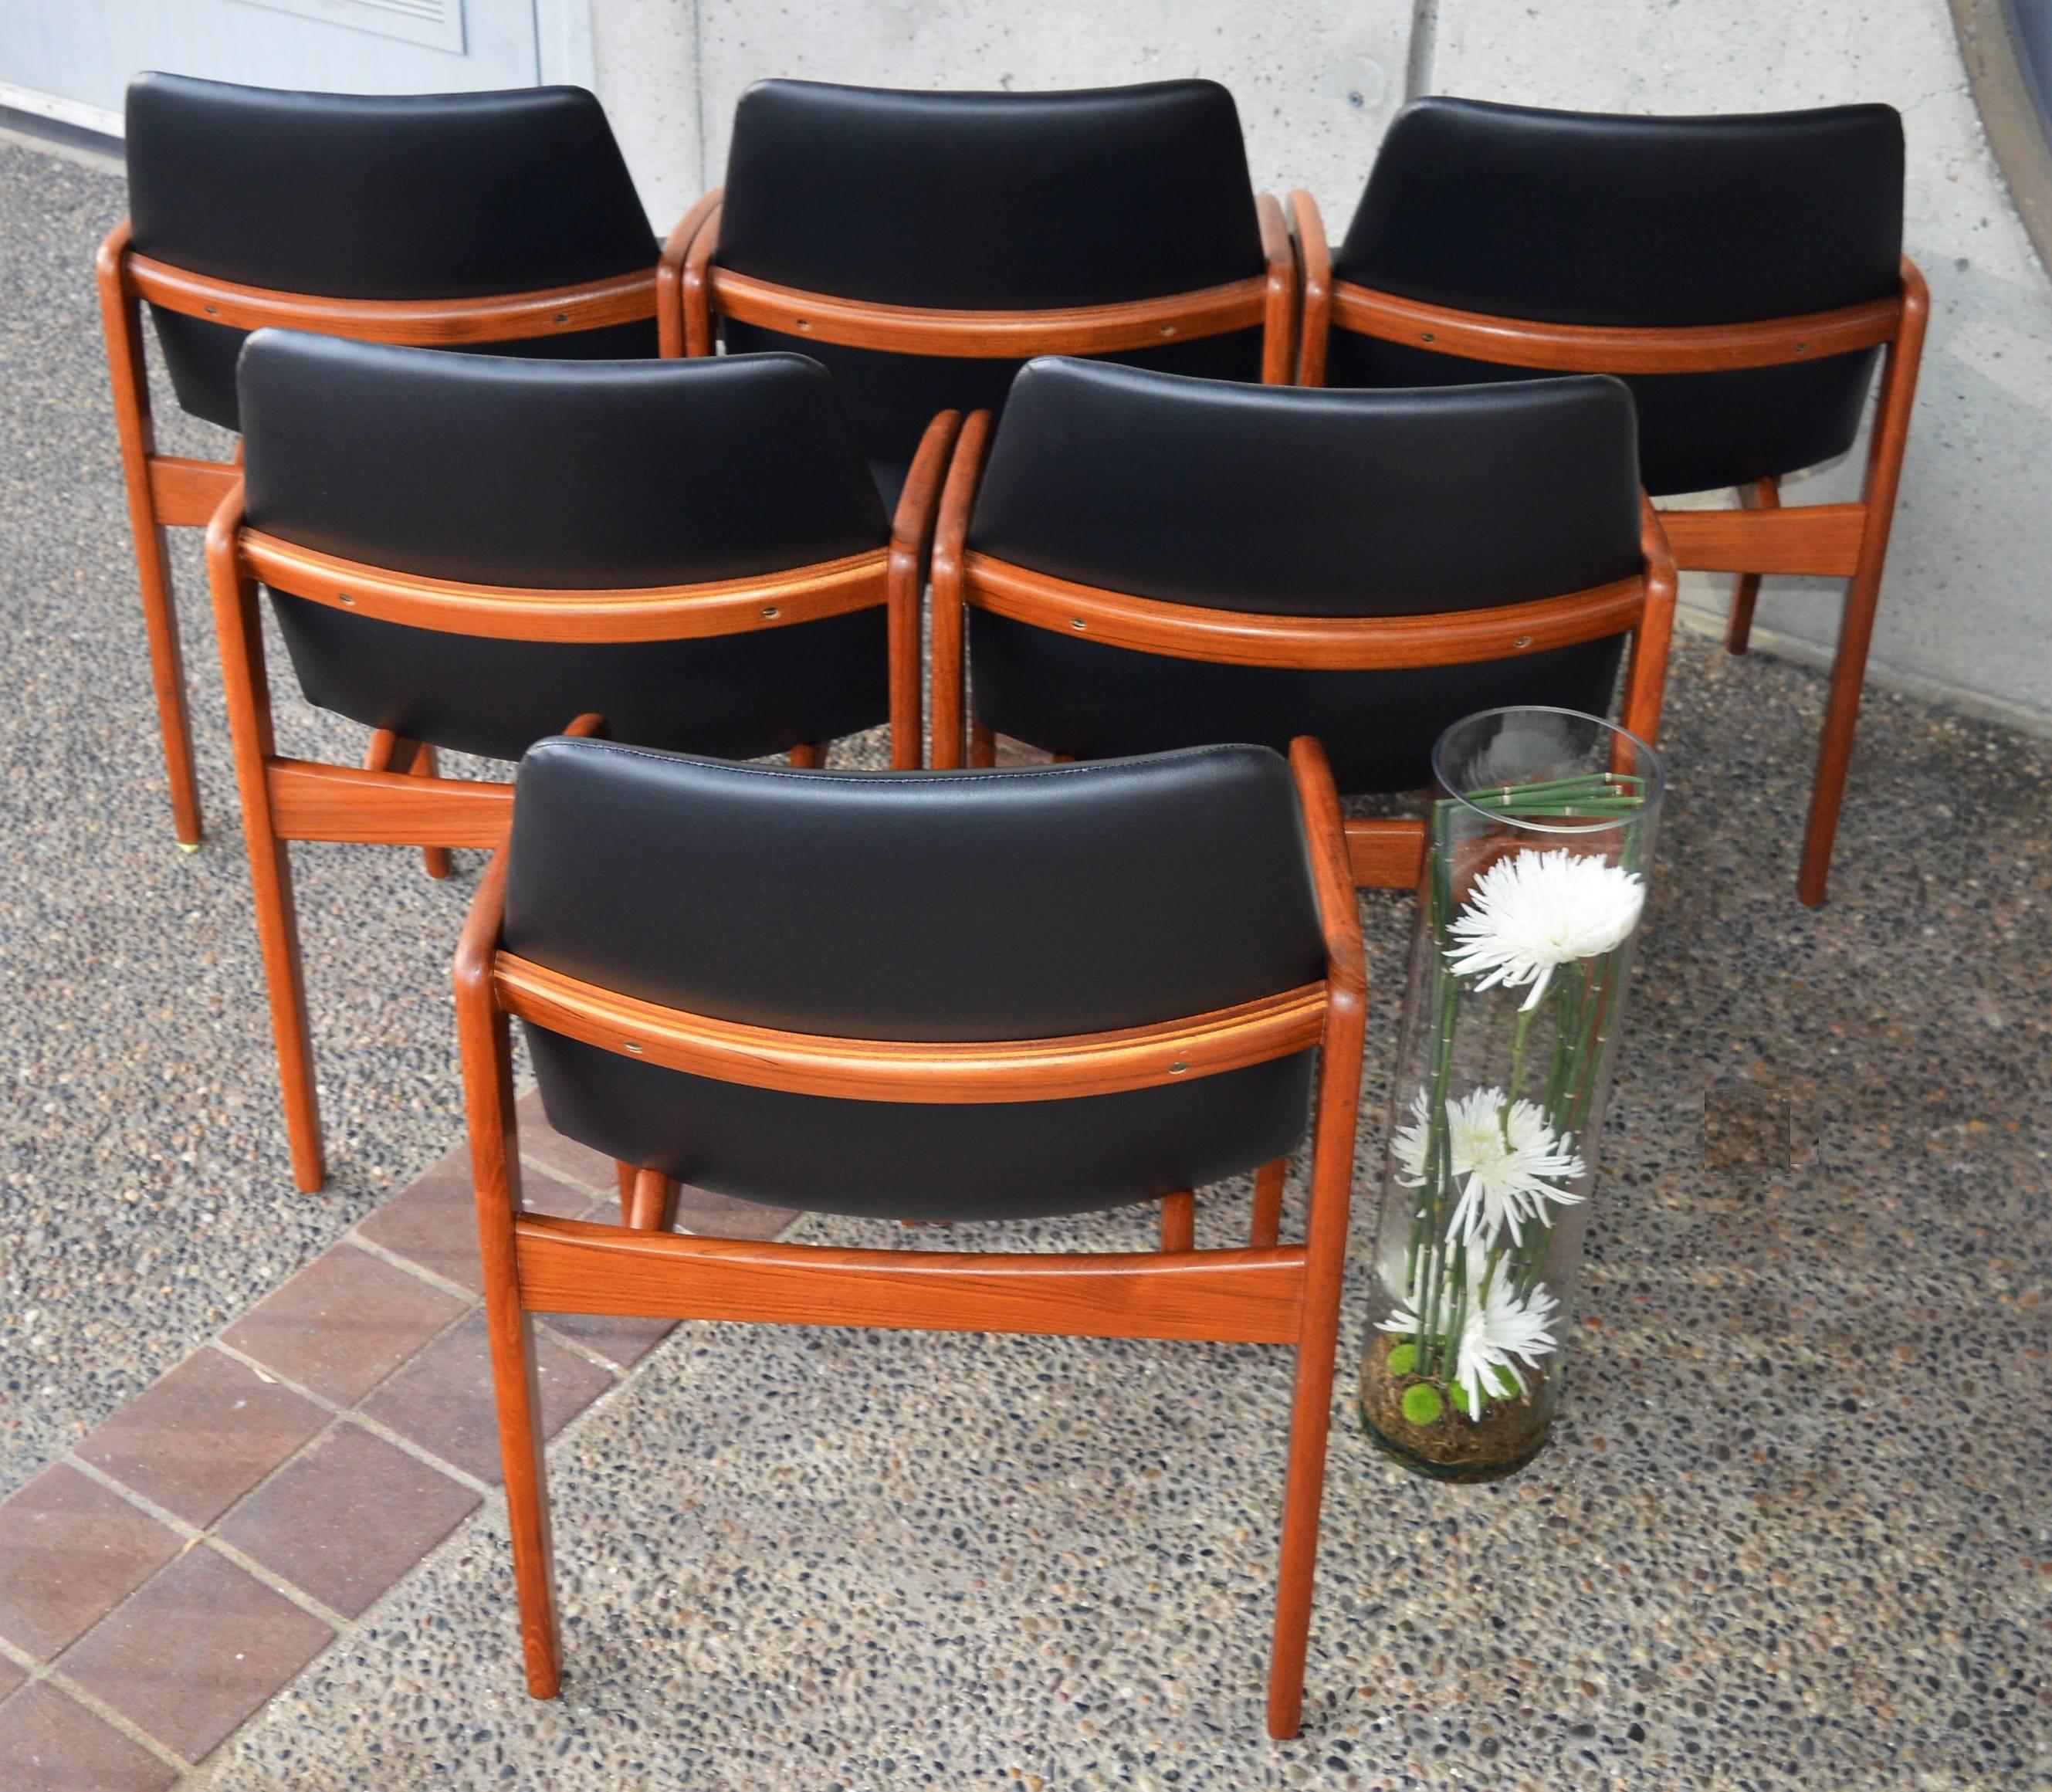 This elegant set of six Danish modern teak dining chairs were designed by Kai Kristiansen in the 1960s and featured angled armrests that slope gently downward. This makes them ideal for any dining table or conference table, as the standard arms on